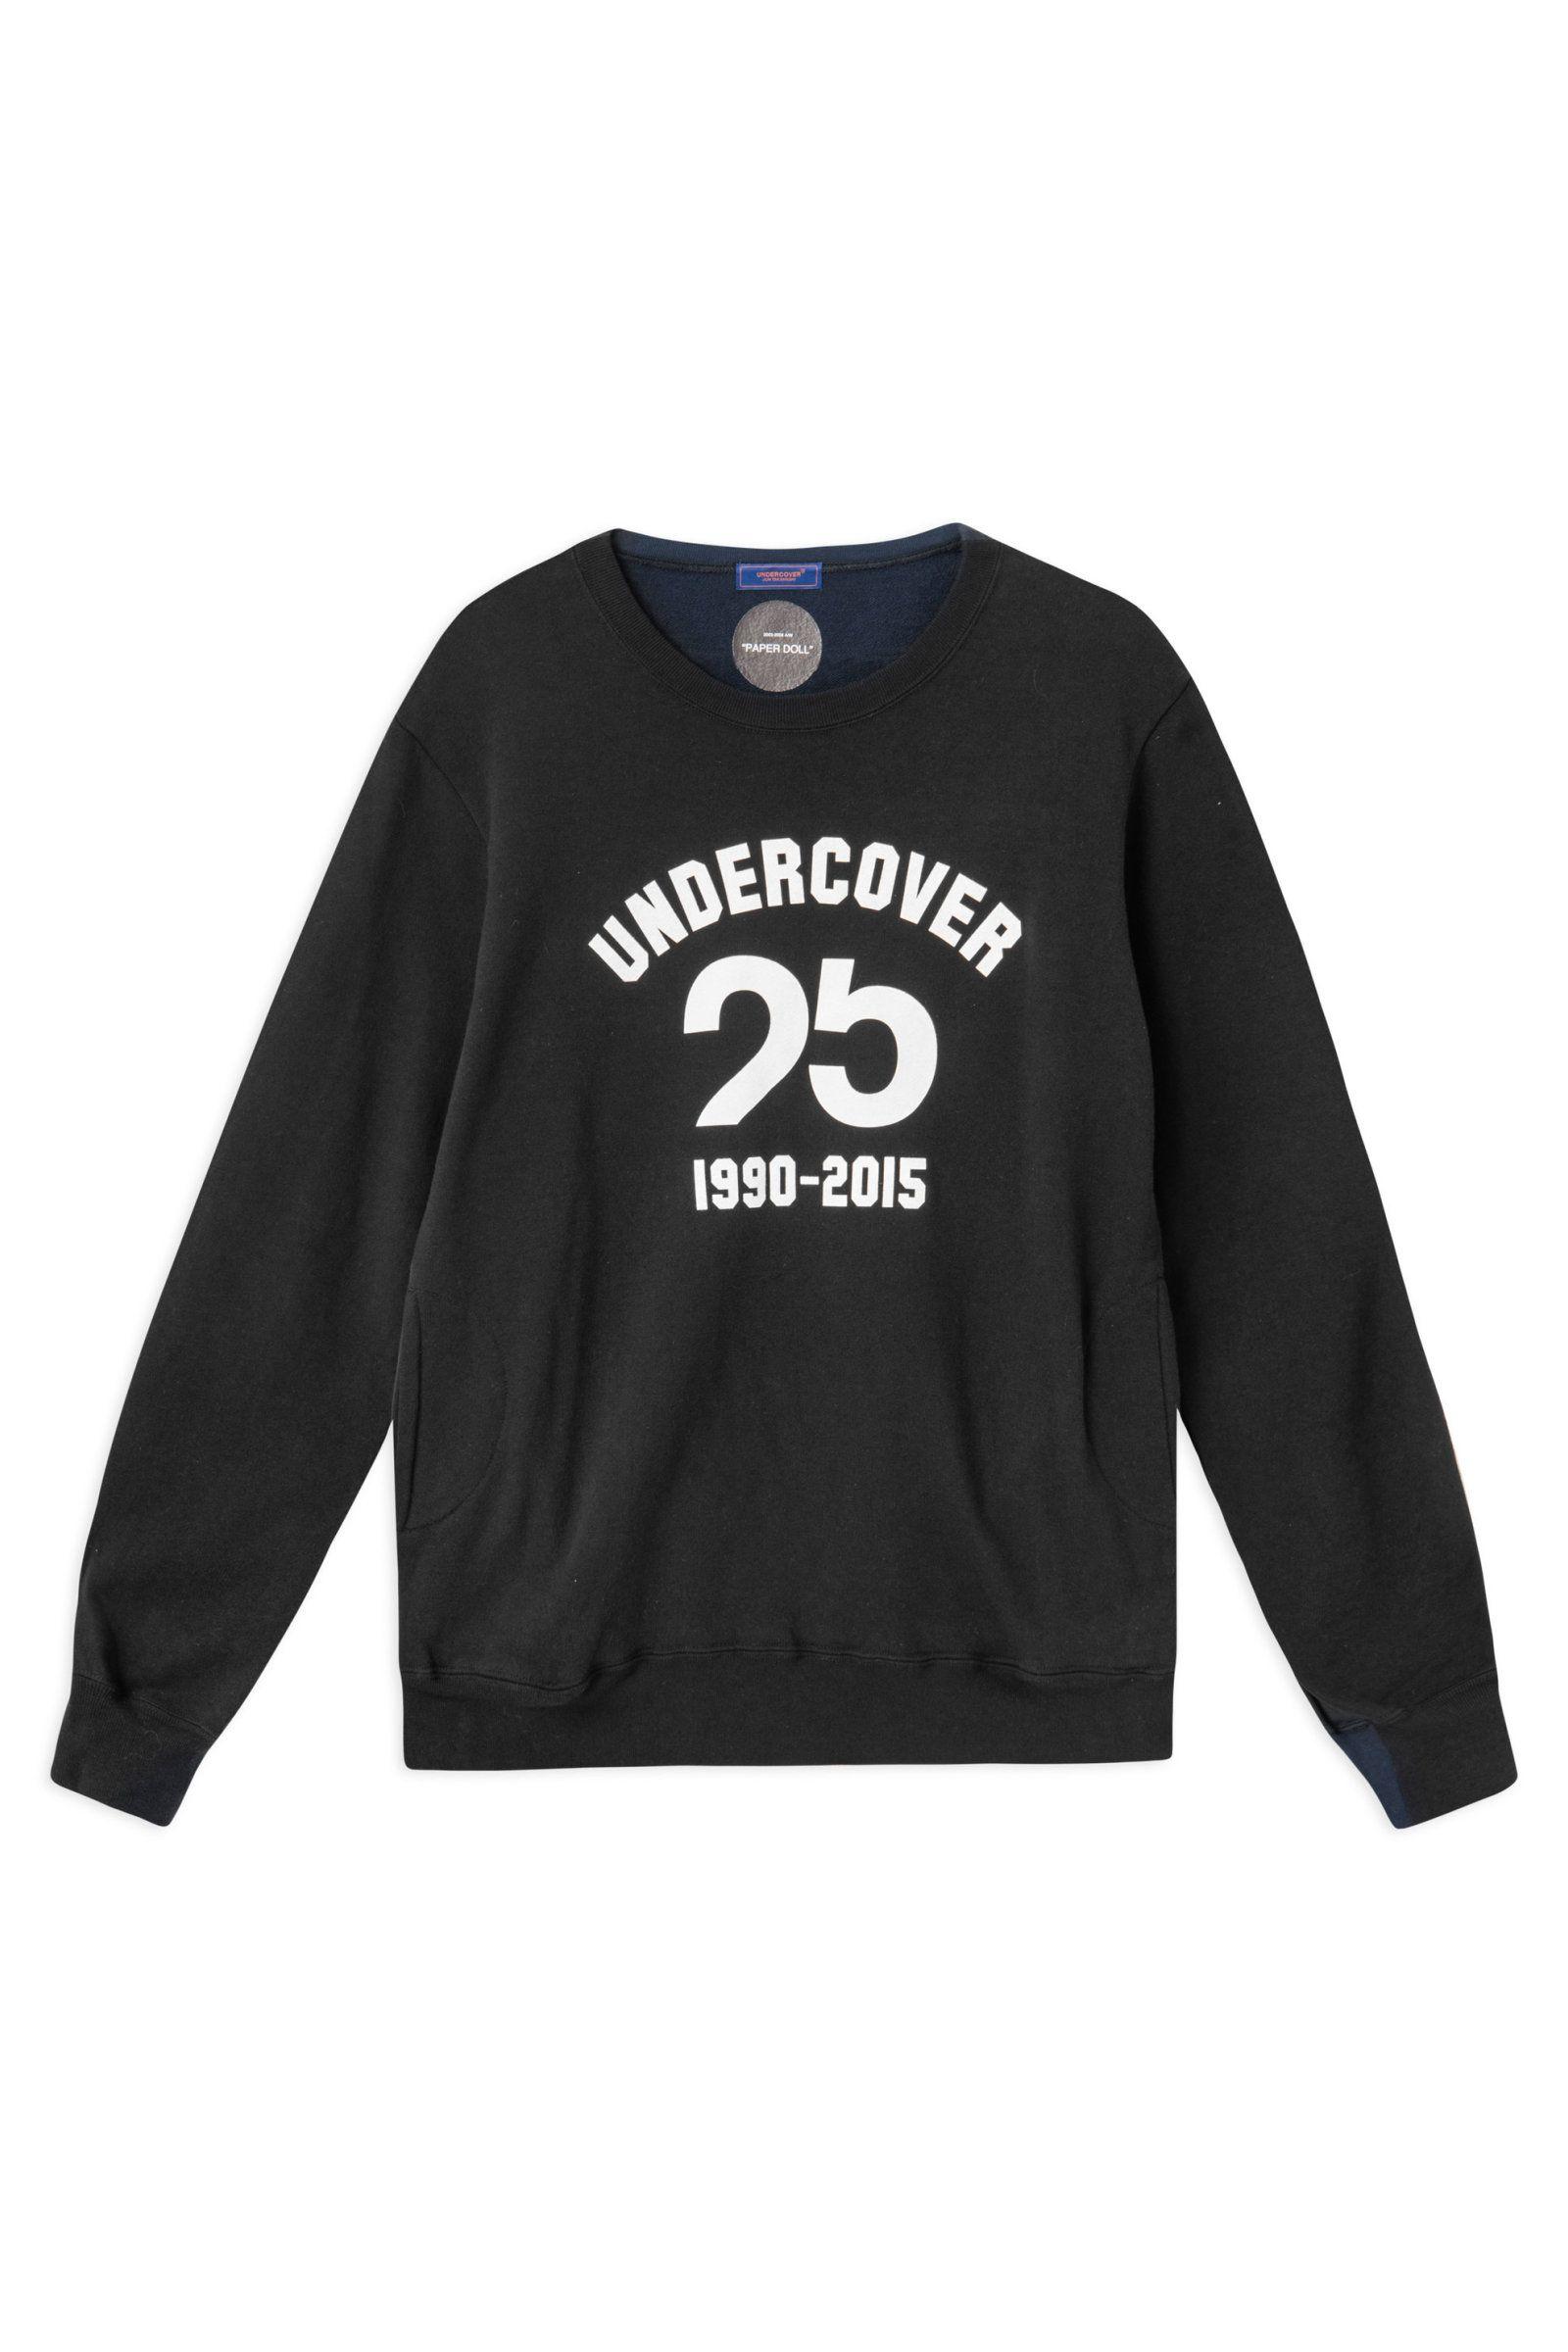 Undercover Clothing Logo - Undercover's sweatshirt in black // Available at Wood Wood